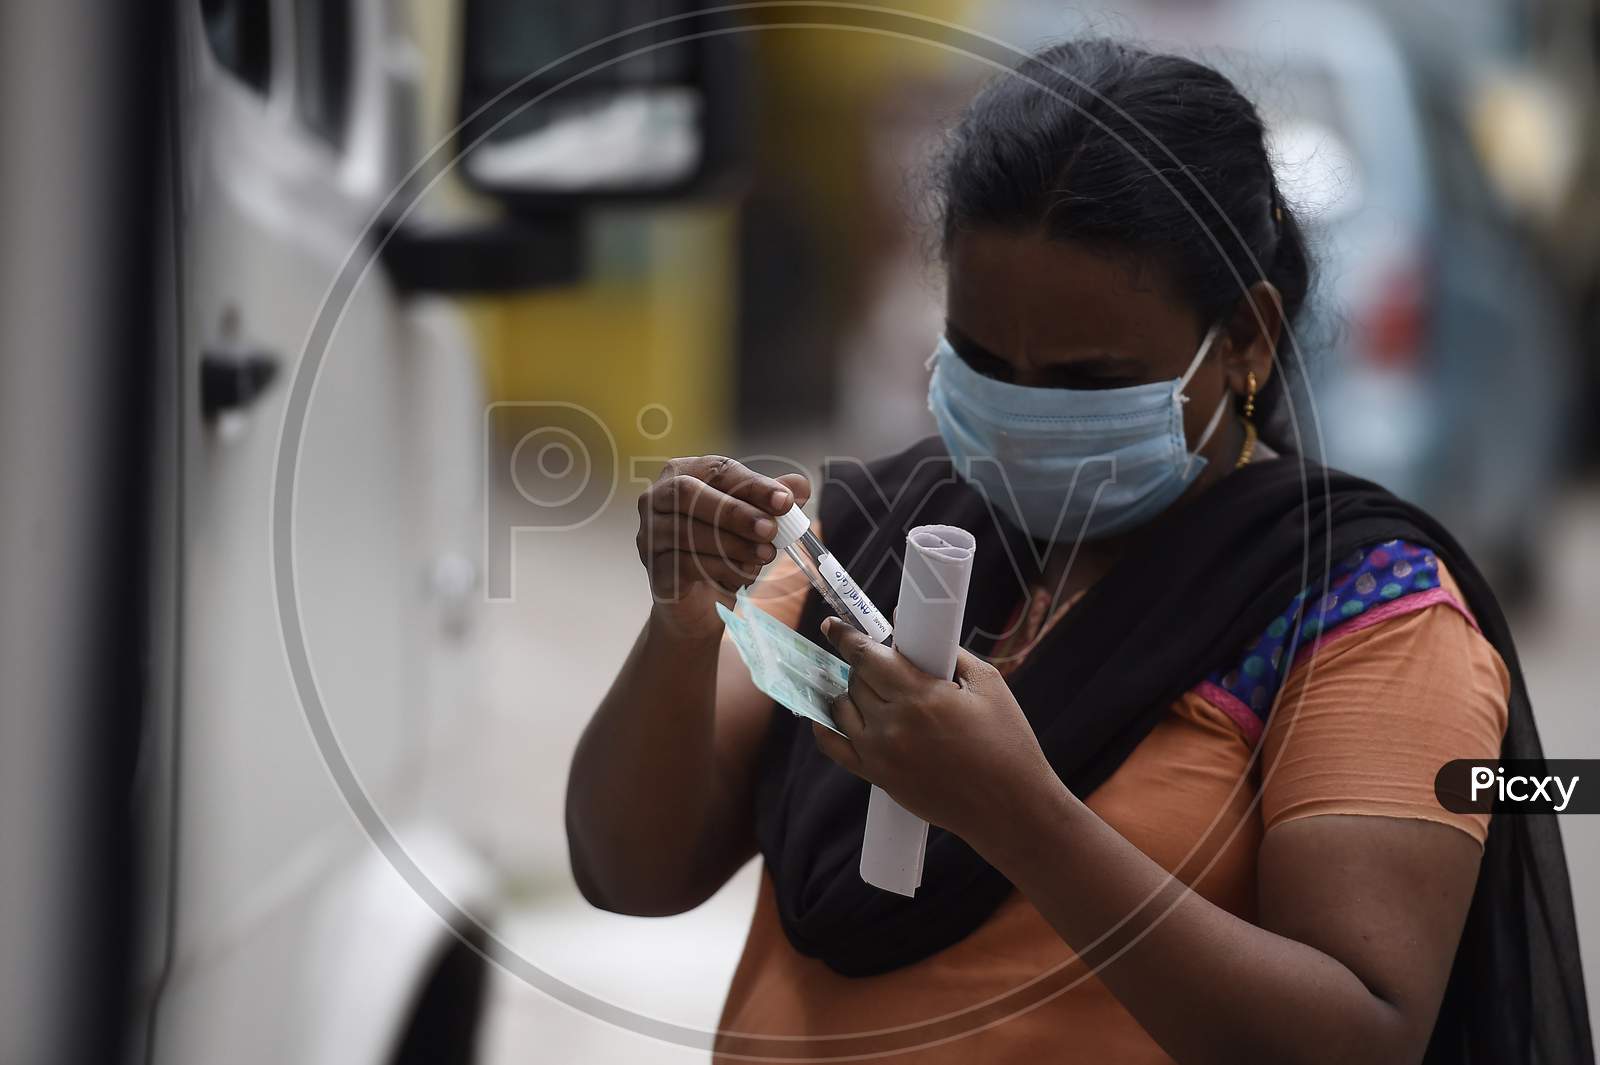 A health worker collects swab samples for Covid-19 testing in Chennai